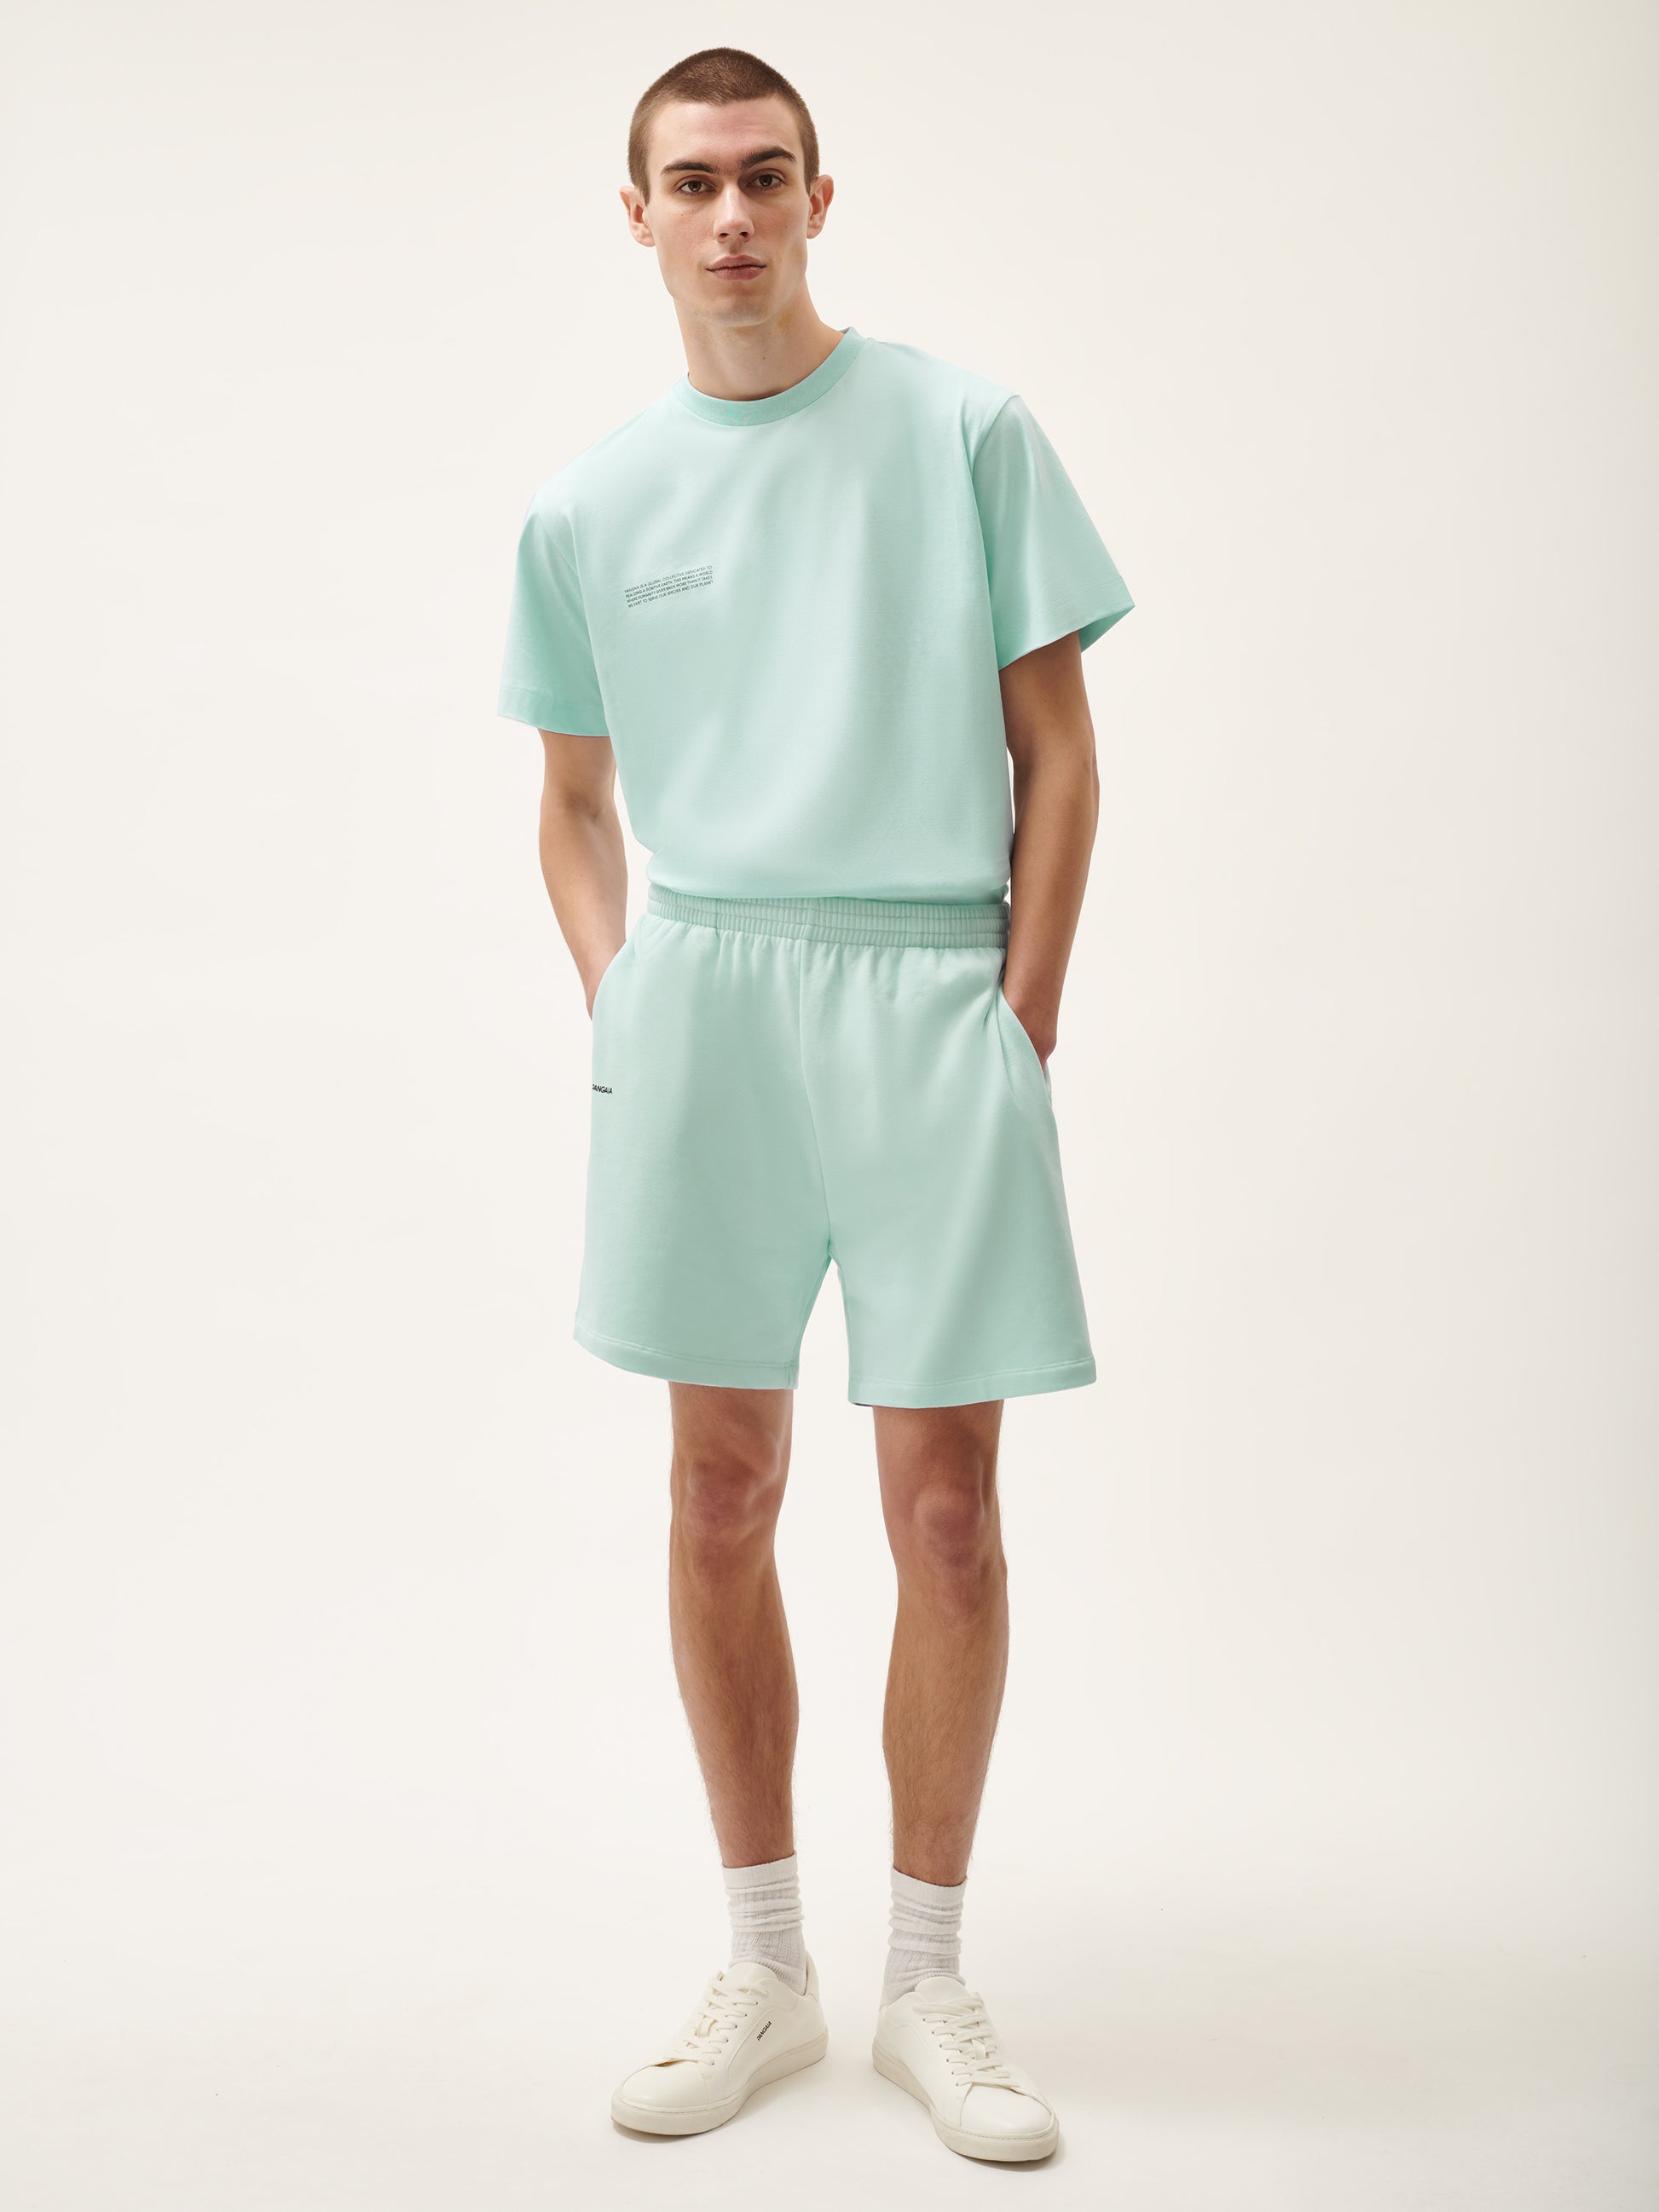 365_Midweight_Mid_Length_Shorts_Reflect_Blue_Male-1